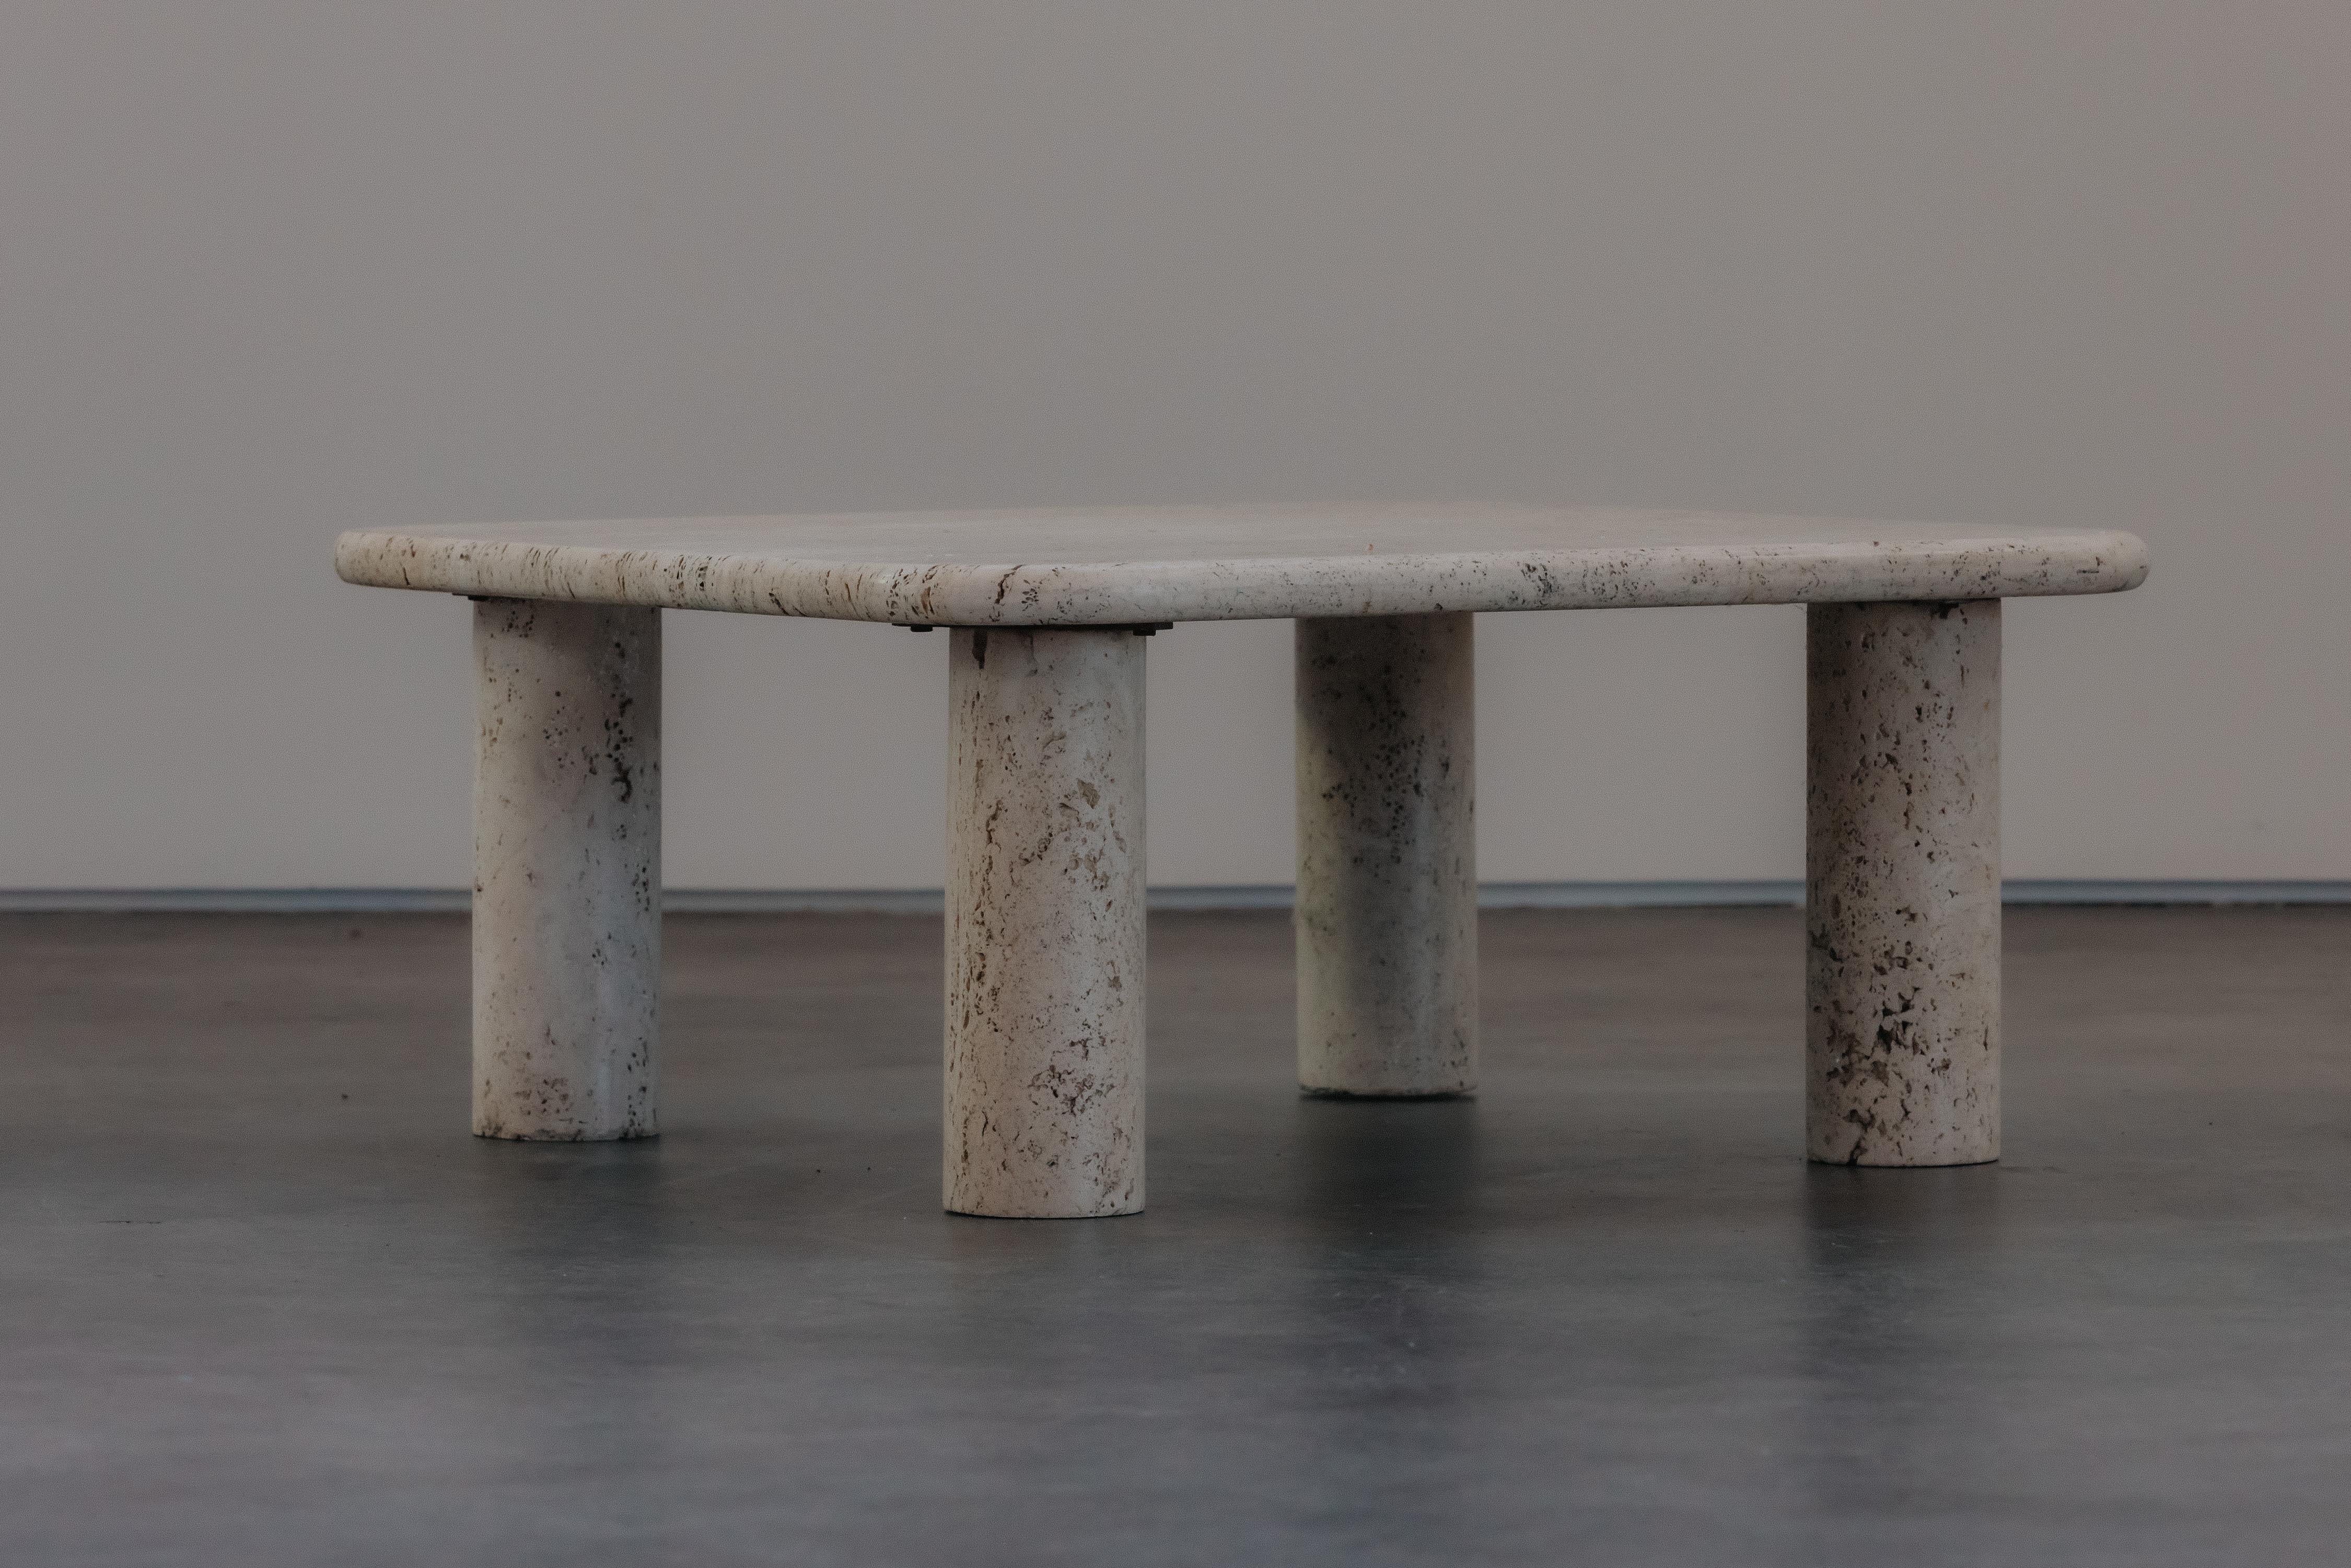 Vintage Travertine Coffee Table From France, Circa 1970.  Solid travertine construction with very light wear and use.